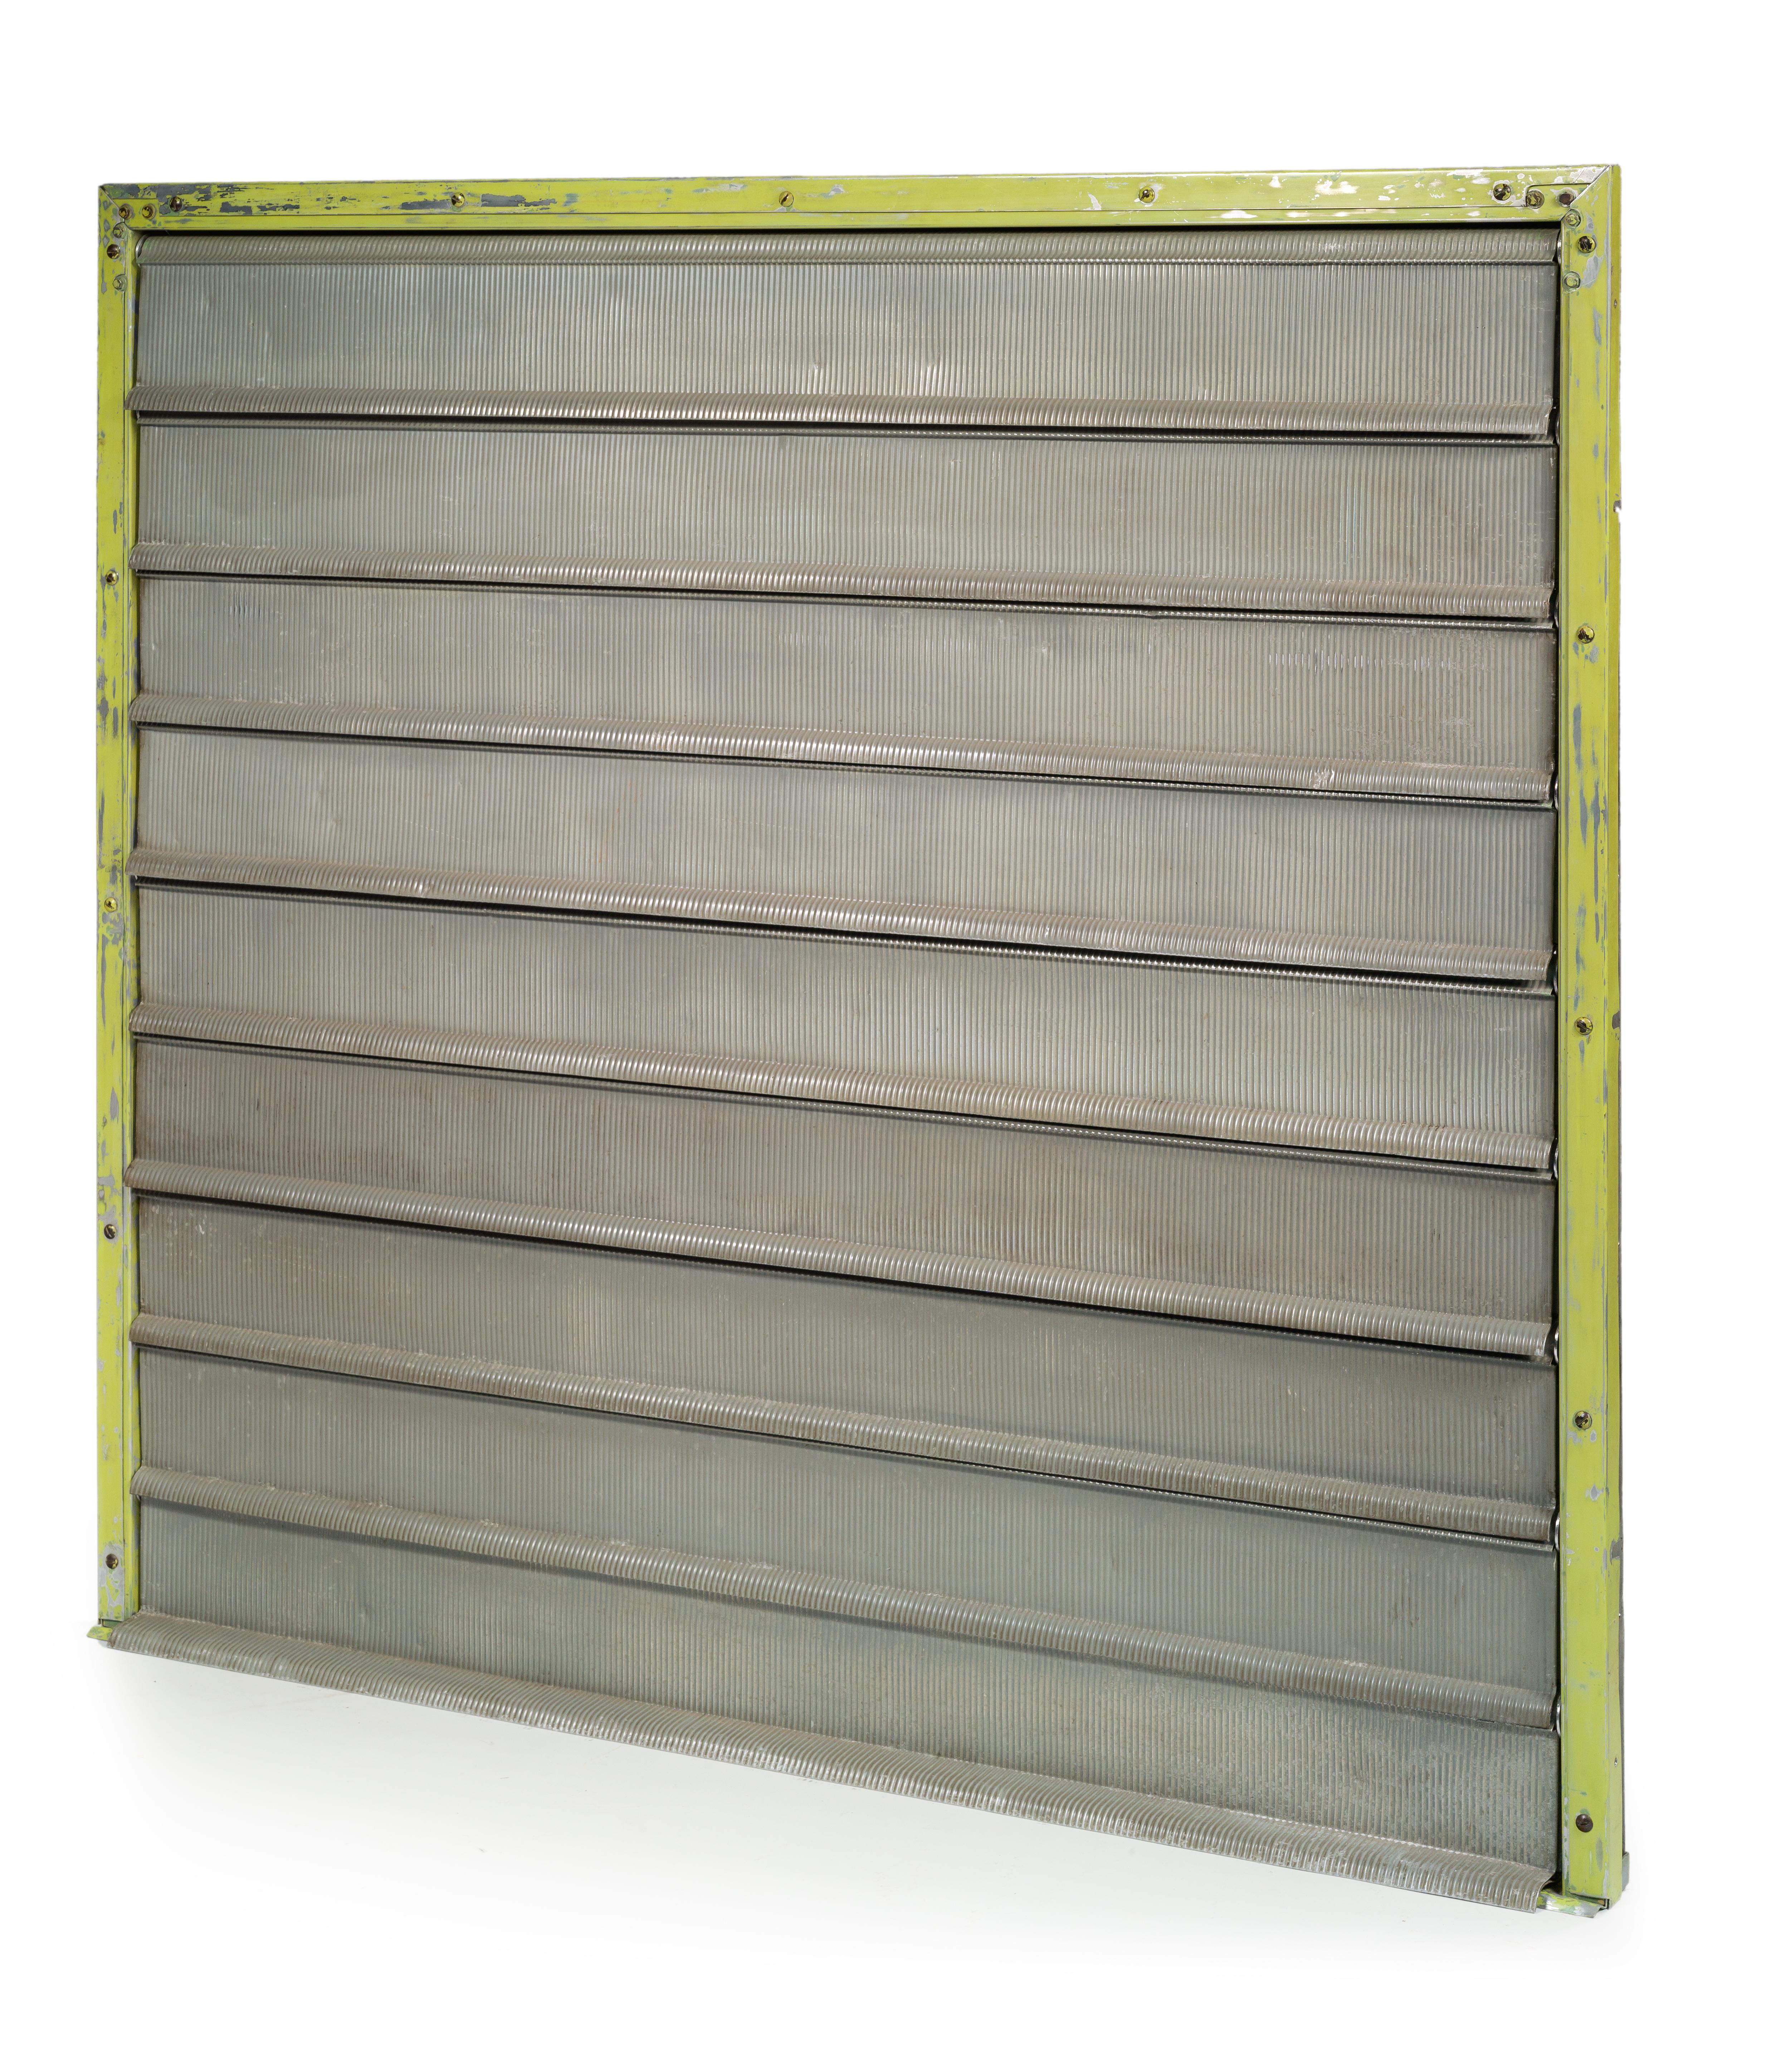 Jean Prouvé

Louvers, 1952.

Provenance
- One of 19 ground level studios from The Unité d’habitation Air France, Brazzaville –Congo.

Nine adjustable louvers, gray lacquered, in folded grooved aluminum sheet, connected by a rail system